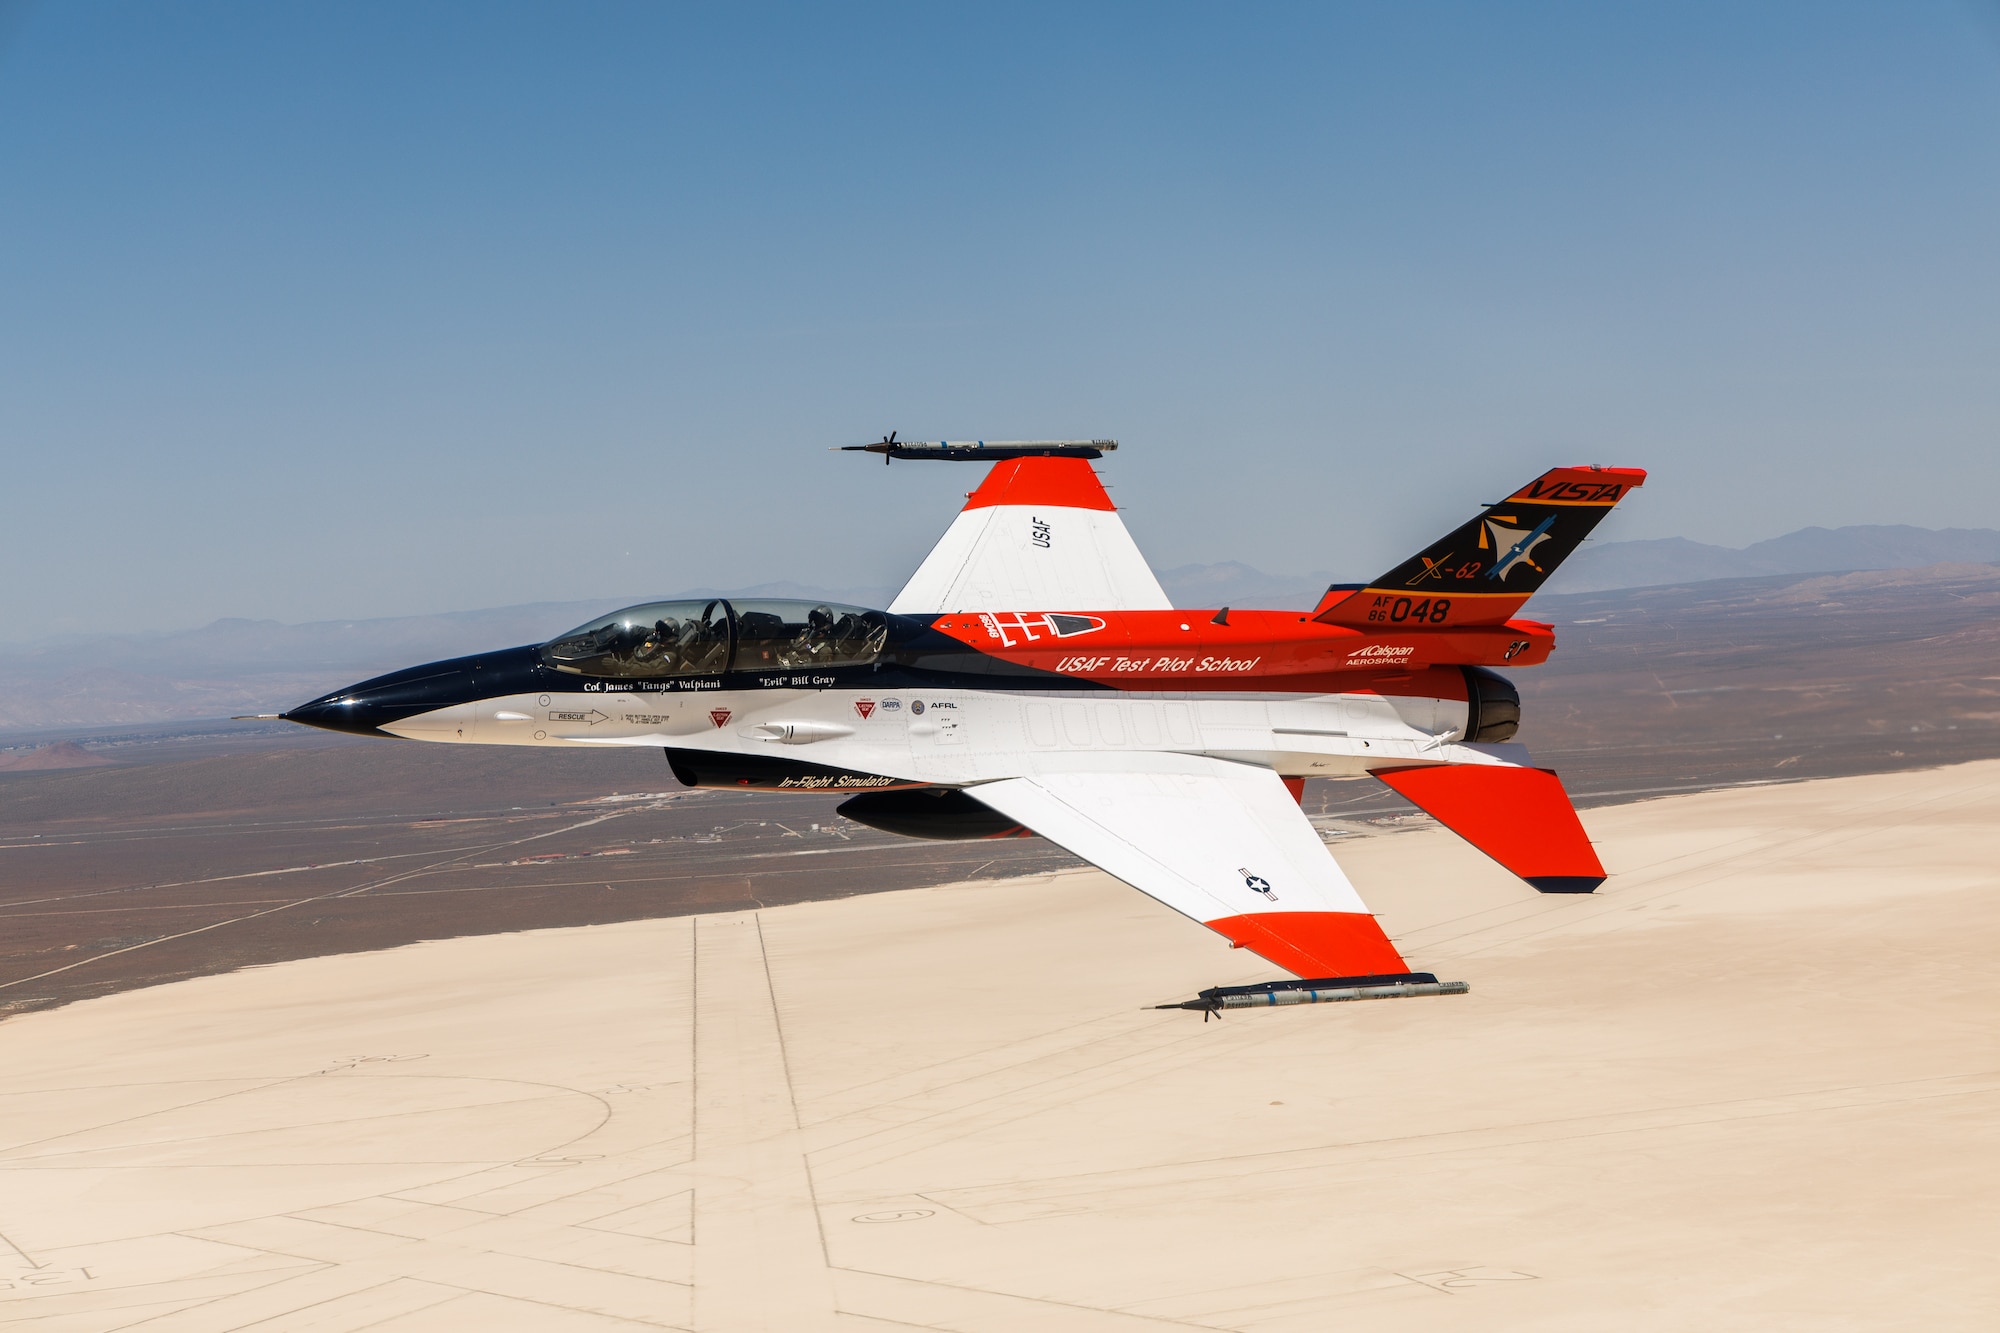 Secretary of the Air Force Frank Kendall flies in the X-62 VISTA in the skies above Edwards Air Force Base, California, May 2. (Air Force photo by Richard Gonzales)